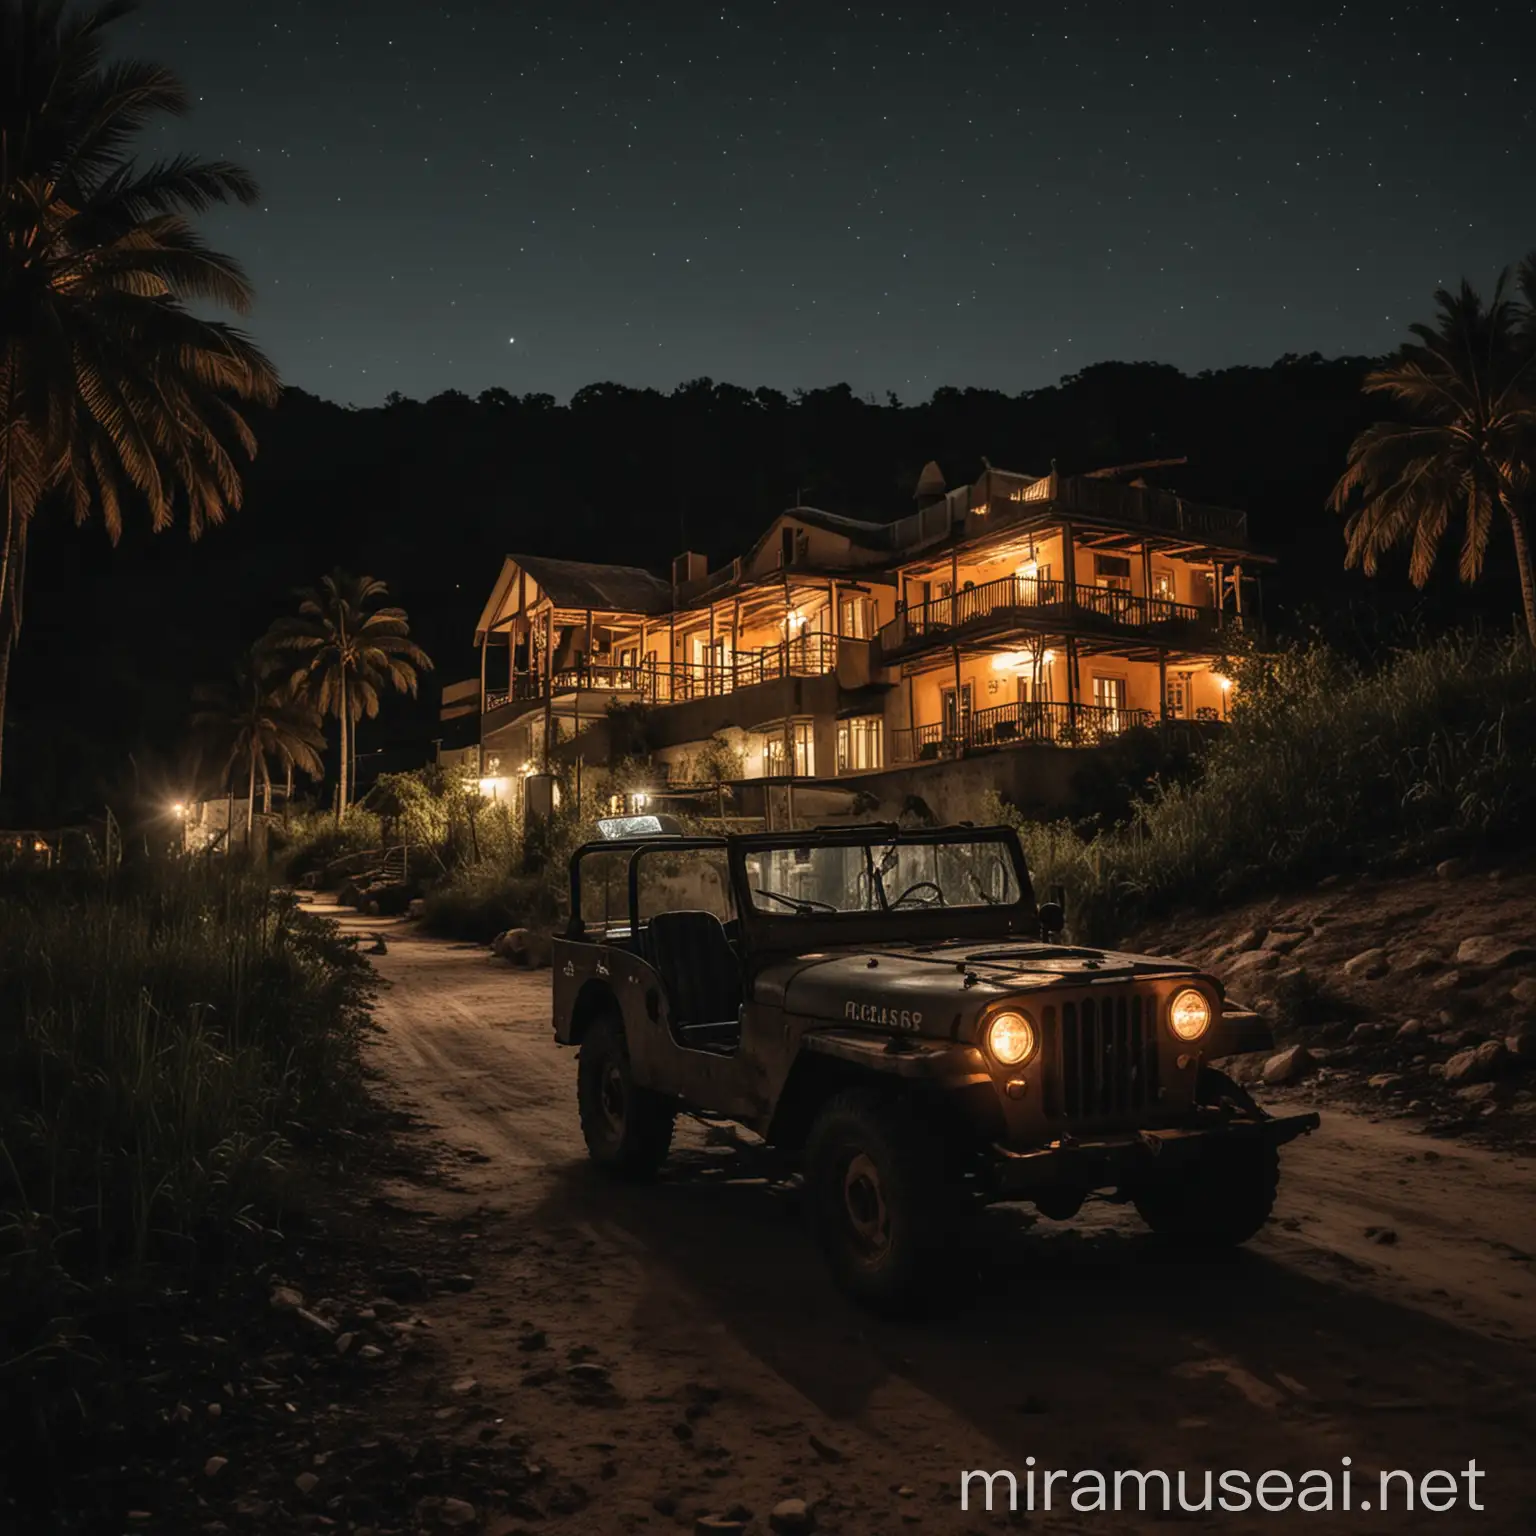 an old jeep heading towards an old resort at night
